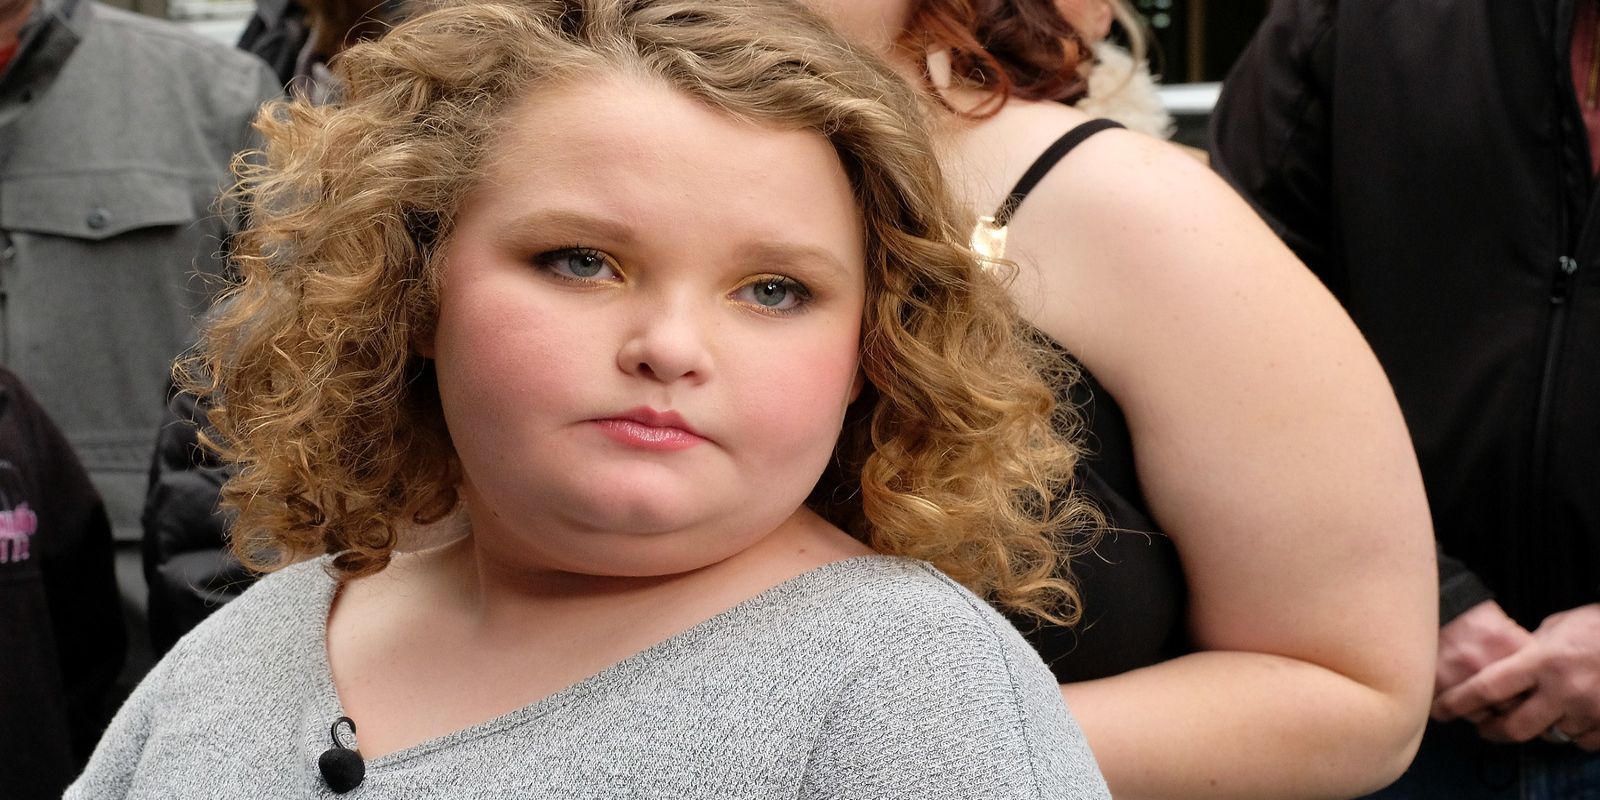 Alana Thompson from the TCL series Here Comes Honey Boo Boo.